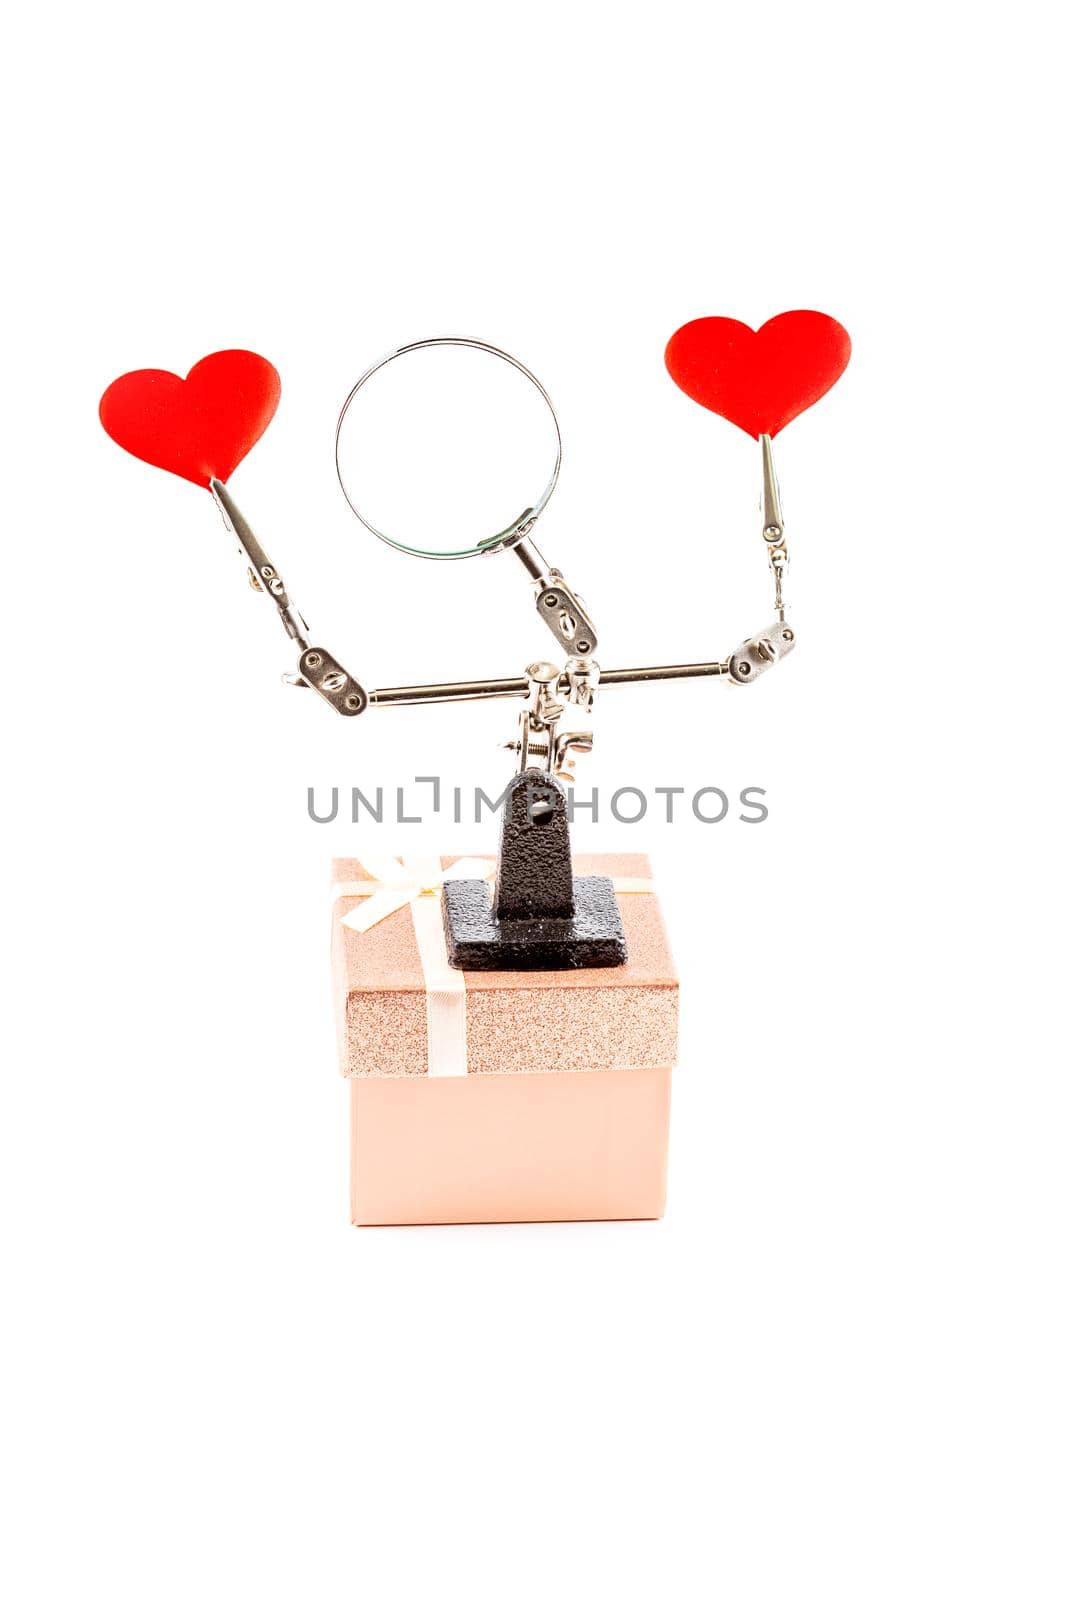 Abstract Valentines Day background with engineering tool third hand holding hearts and gift on white background